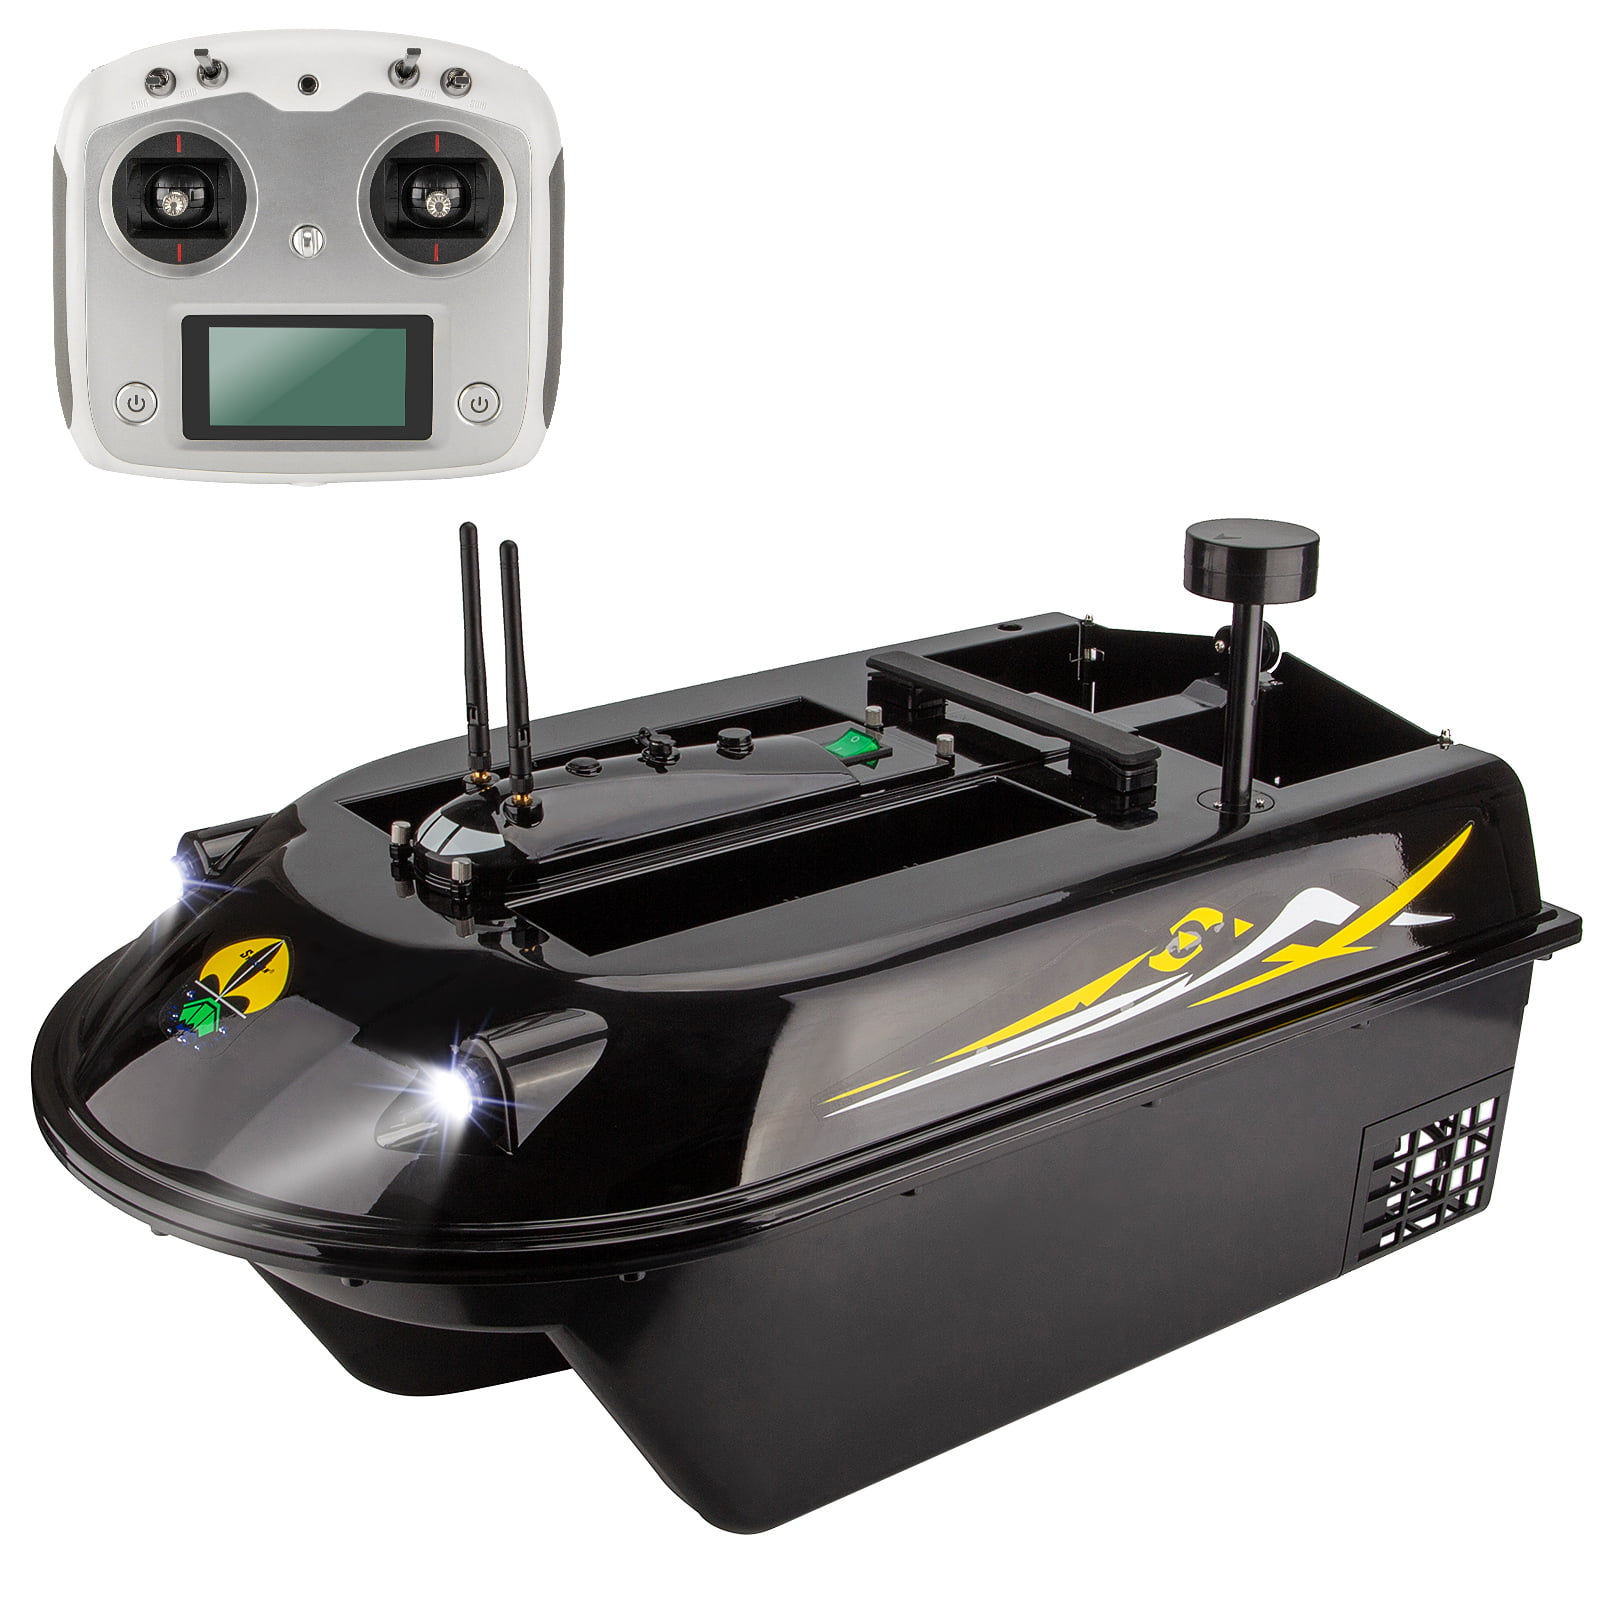 gps fishing bait boat, gps fishing bait boat Suppliers and Manufacturers at